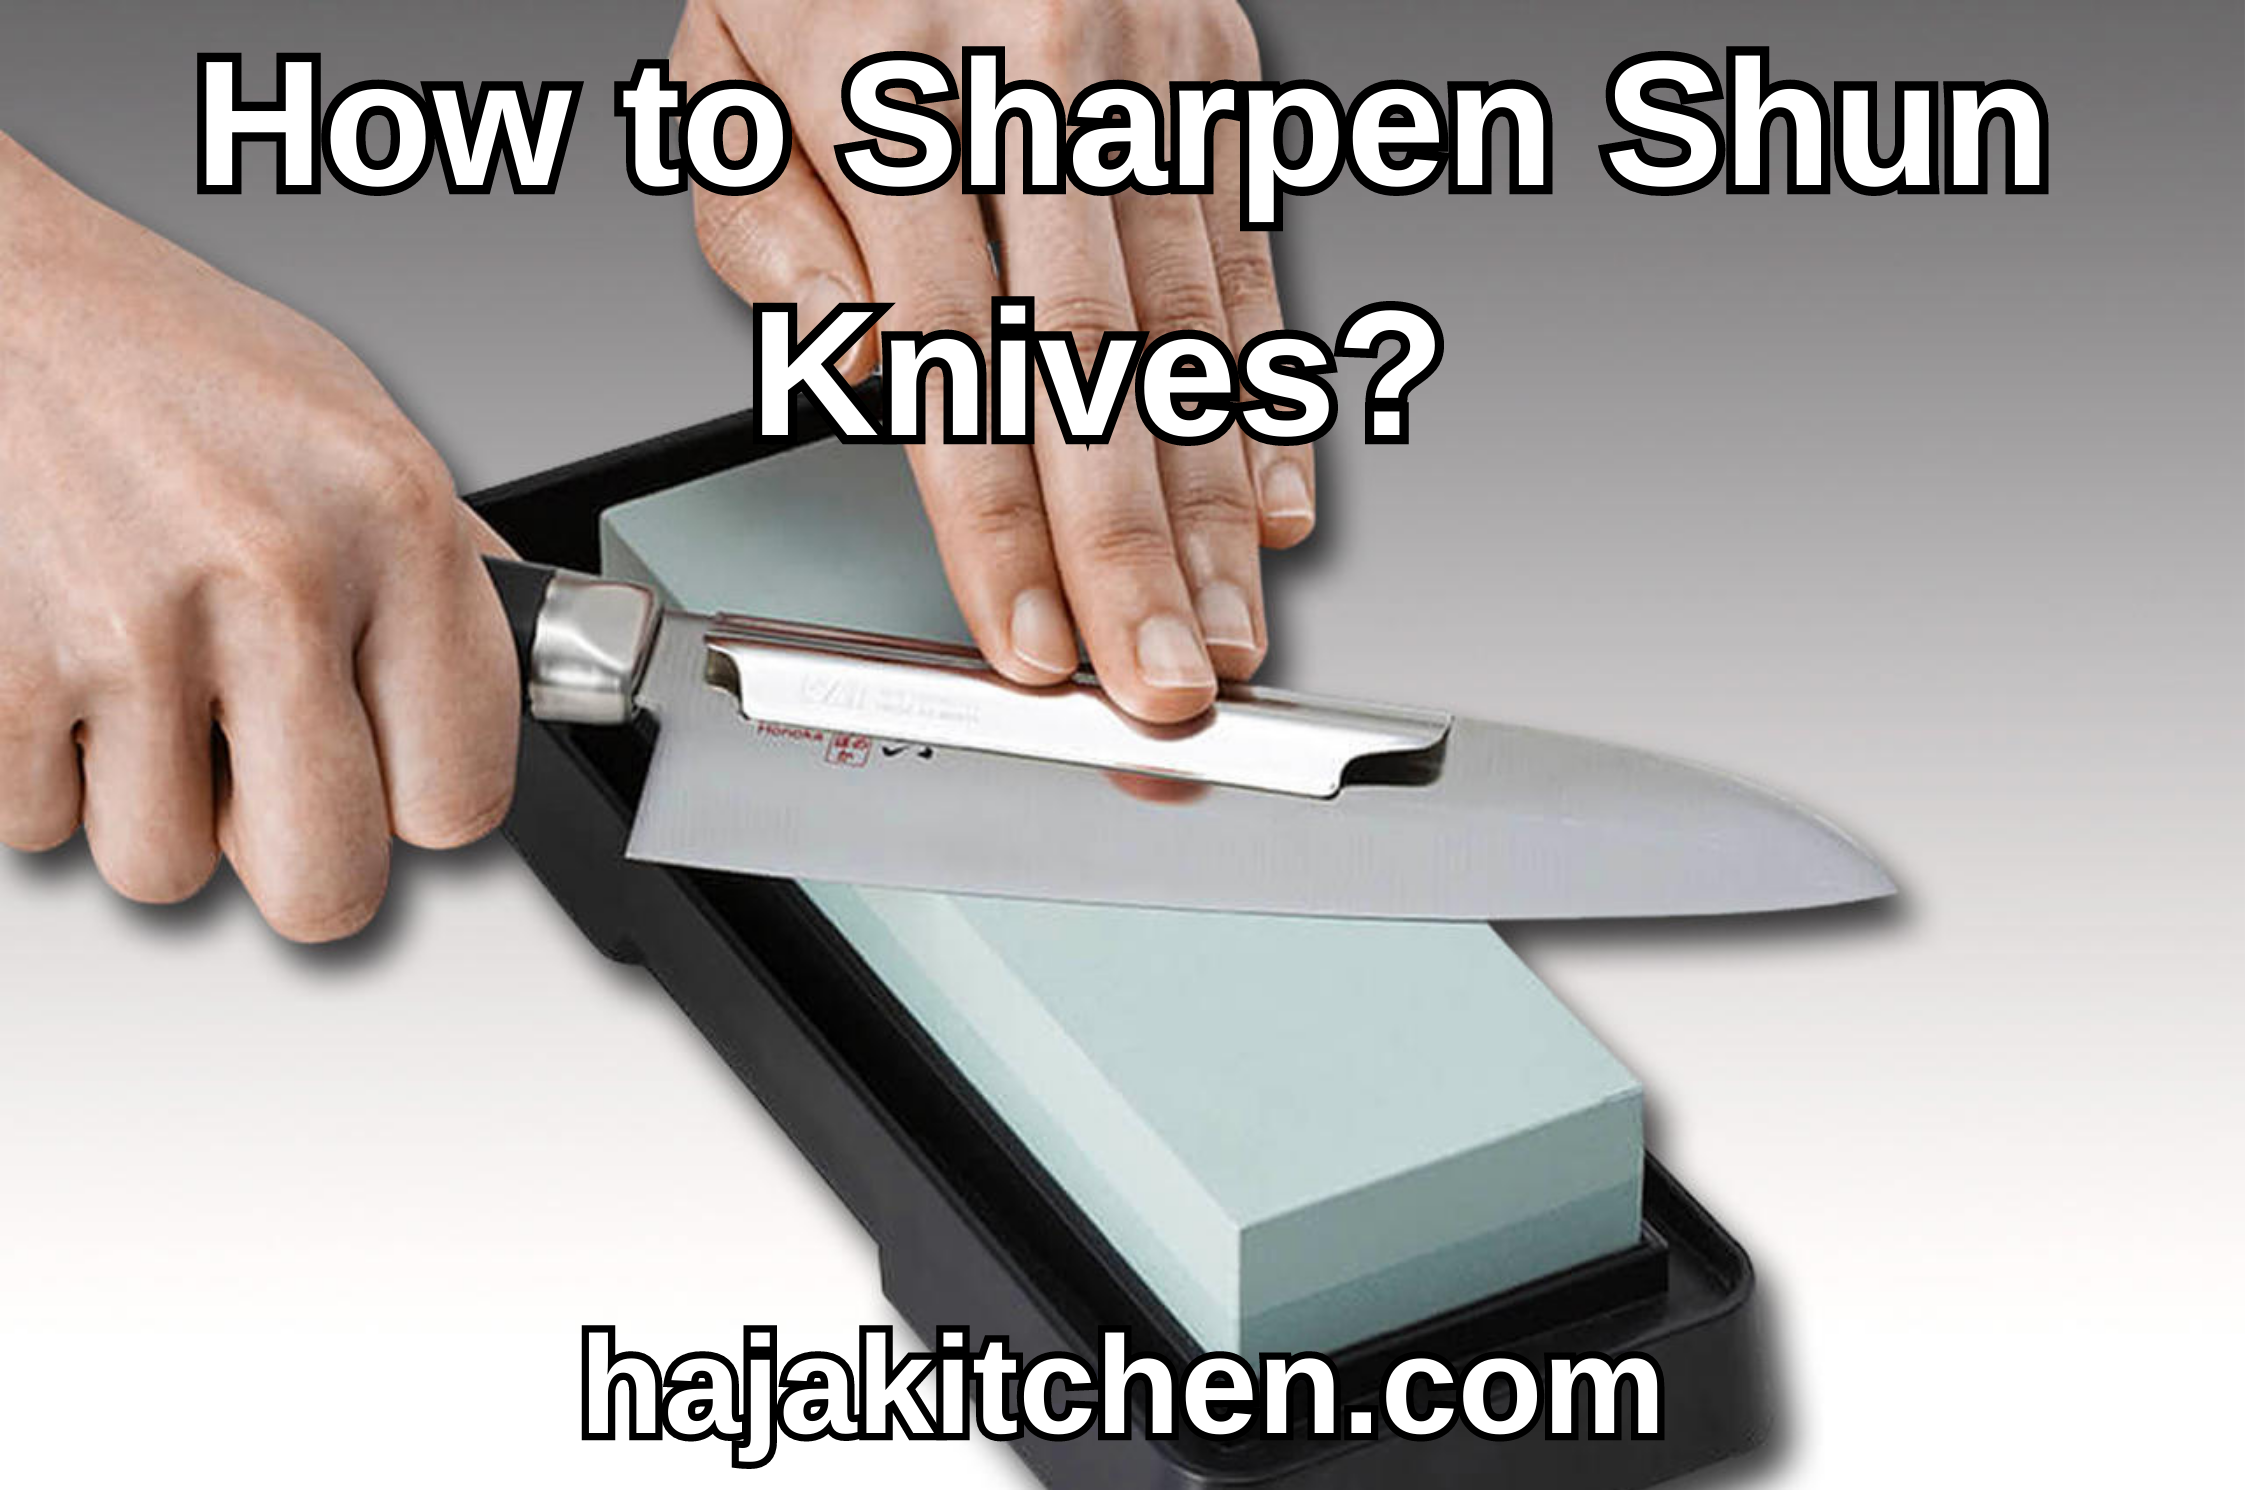 How to Sharpen Shun Knives? [Properly Guided]